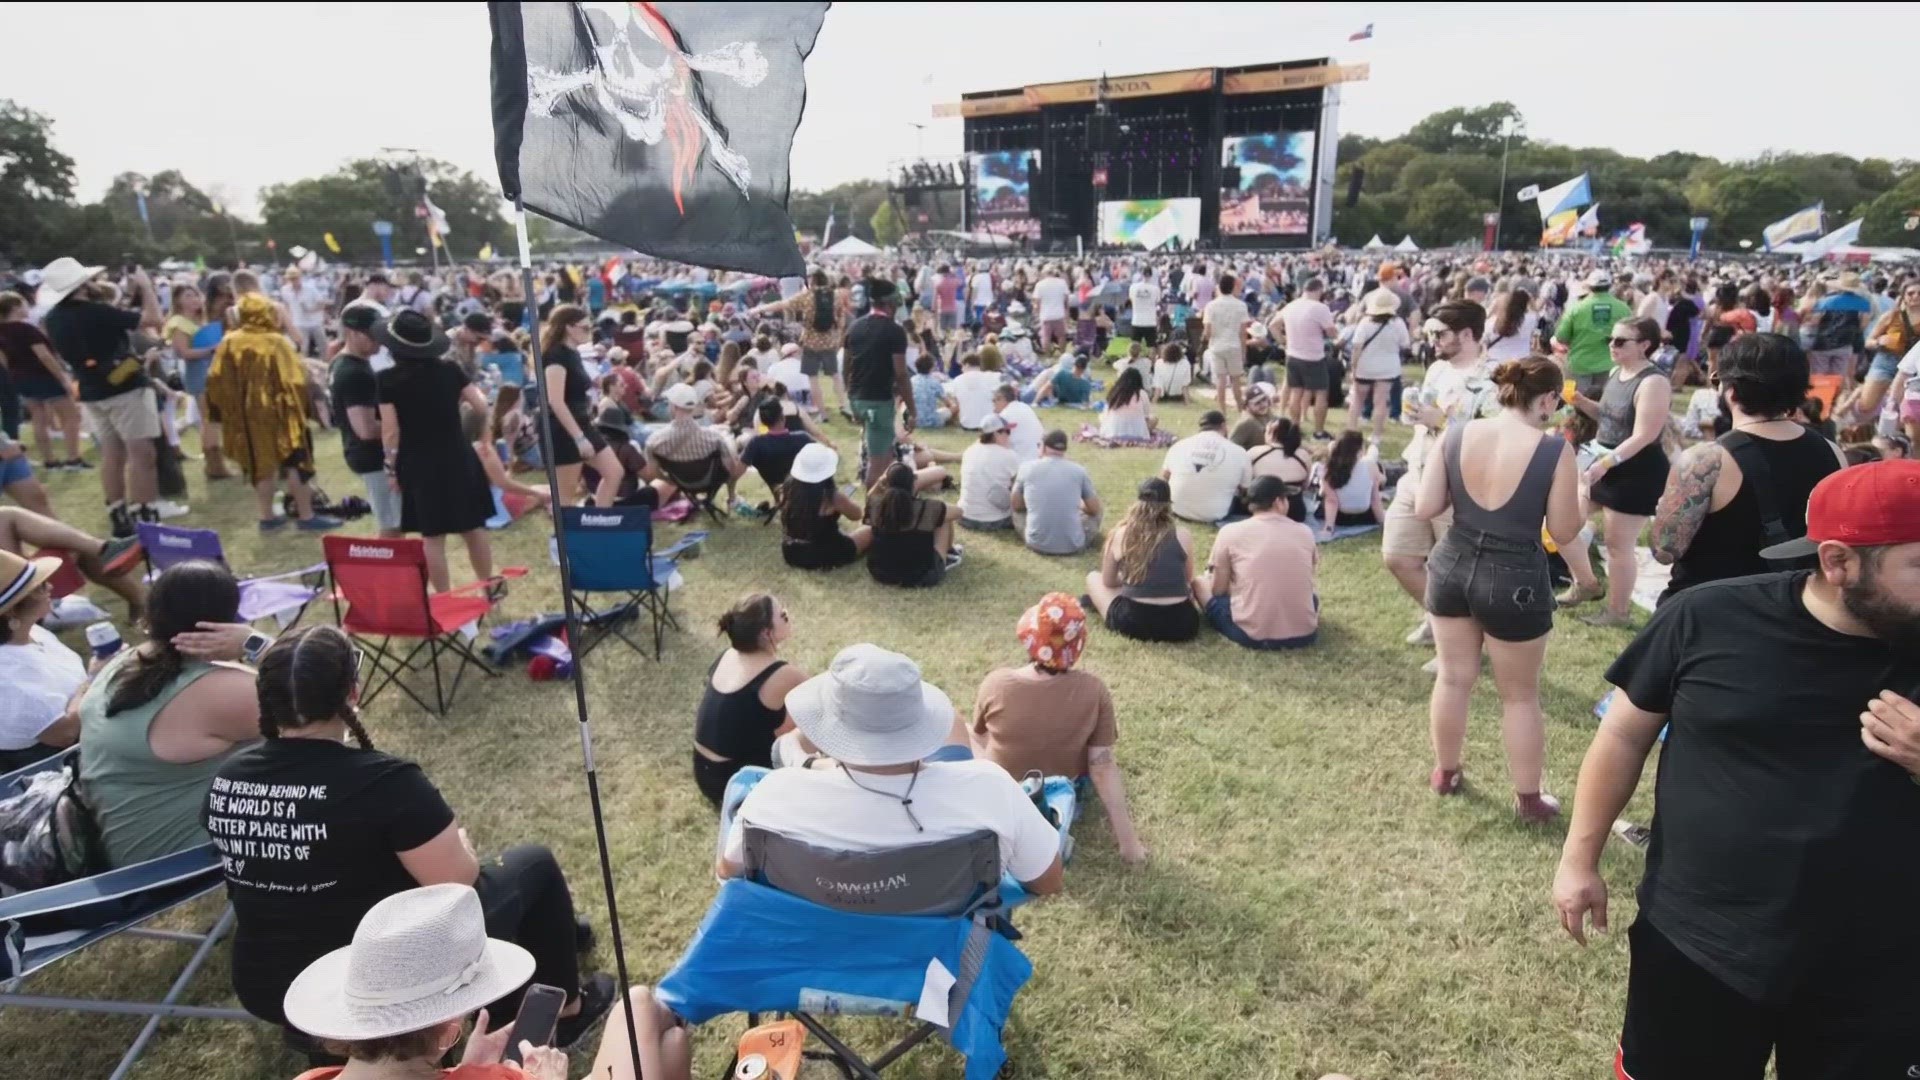 Austin City Limits isn't just hyping up music fans, but also providing a jolt to local businesses.